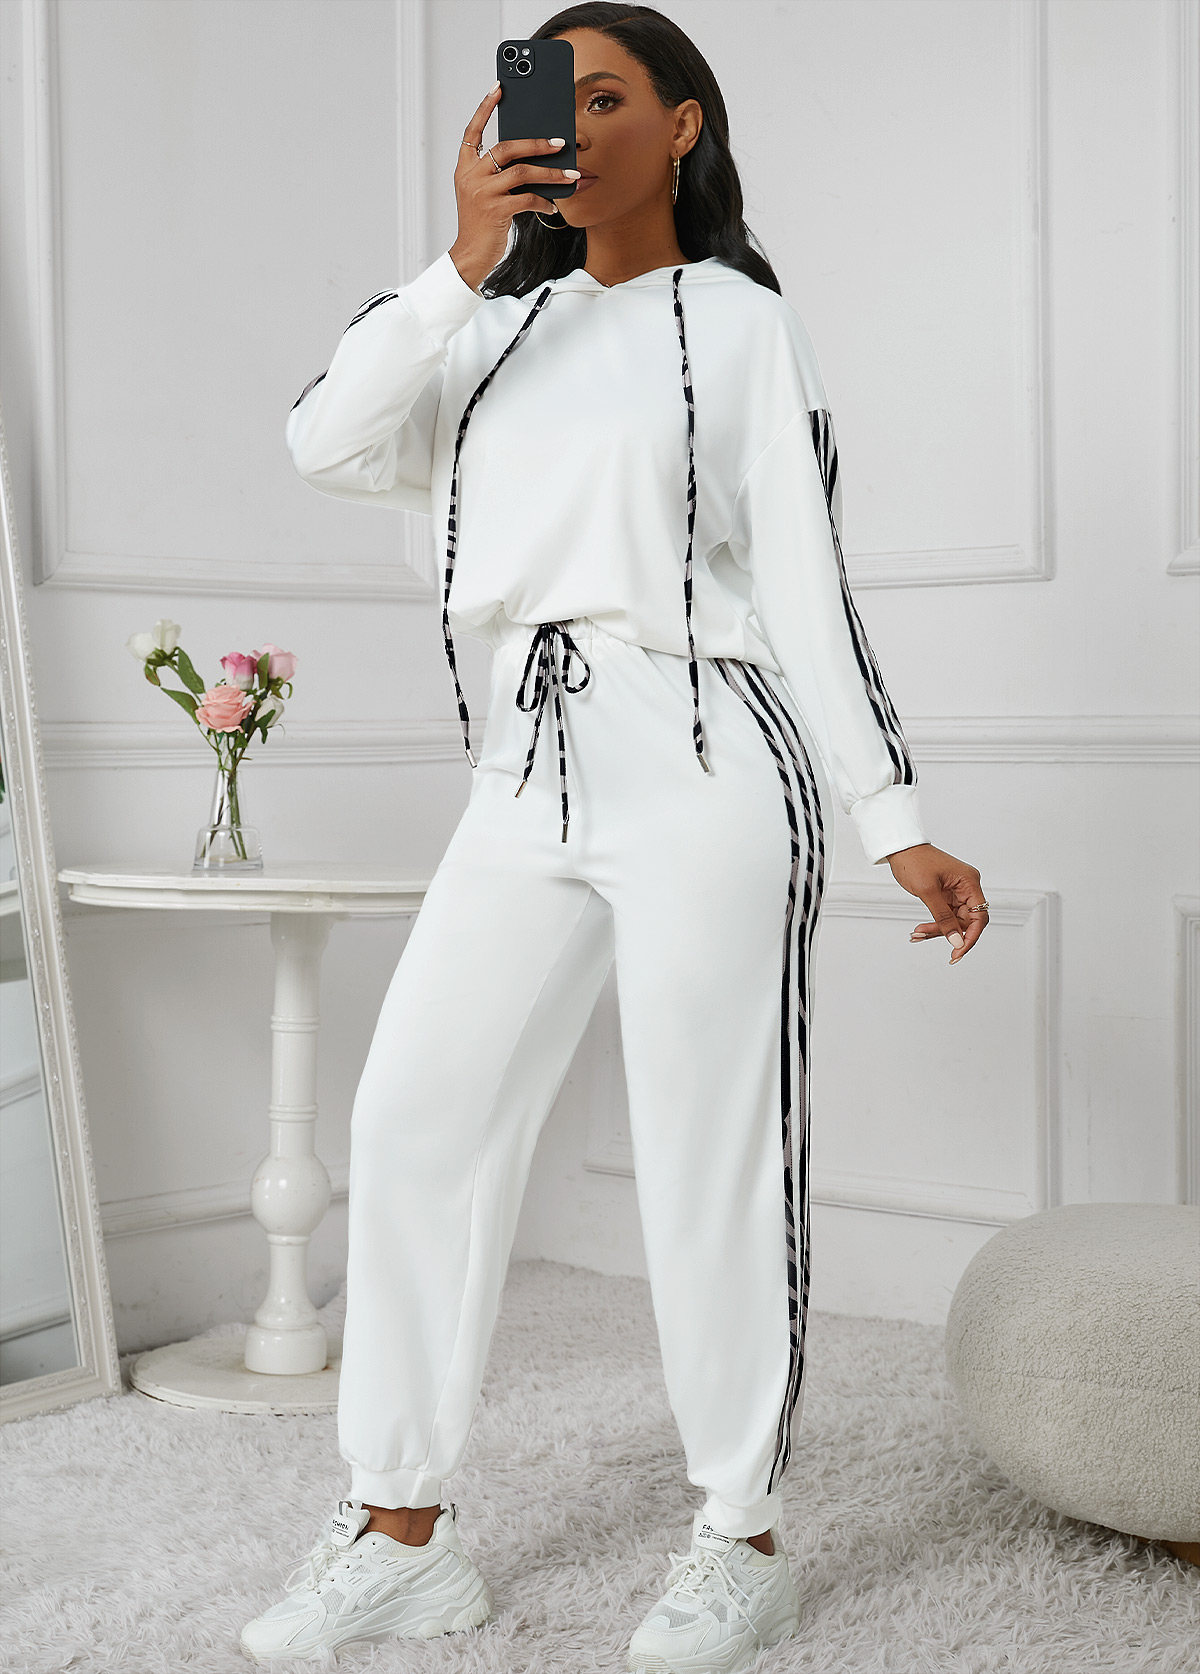 Patchwork White Ankle Length Hooded Jogger Top and Pants